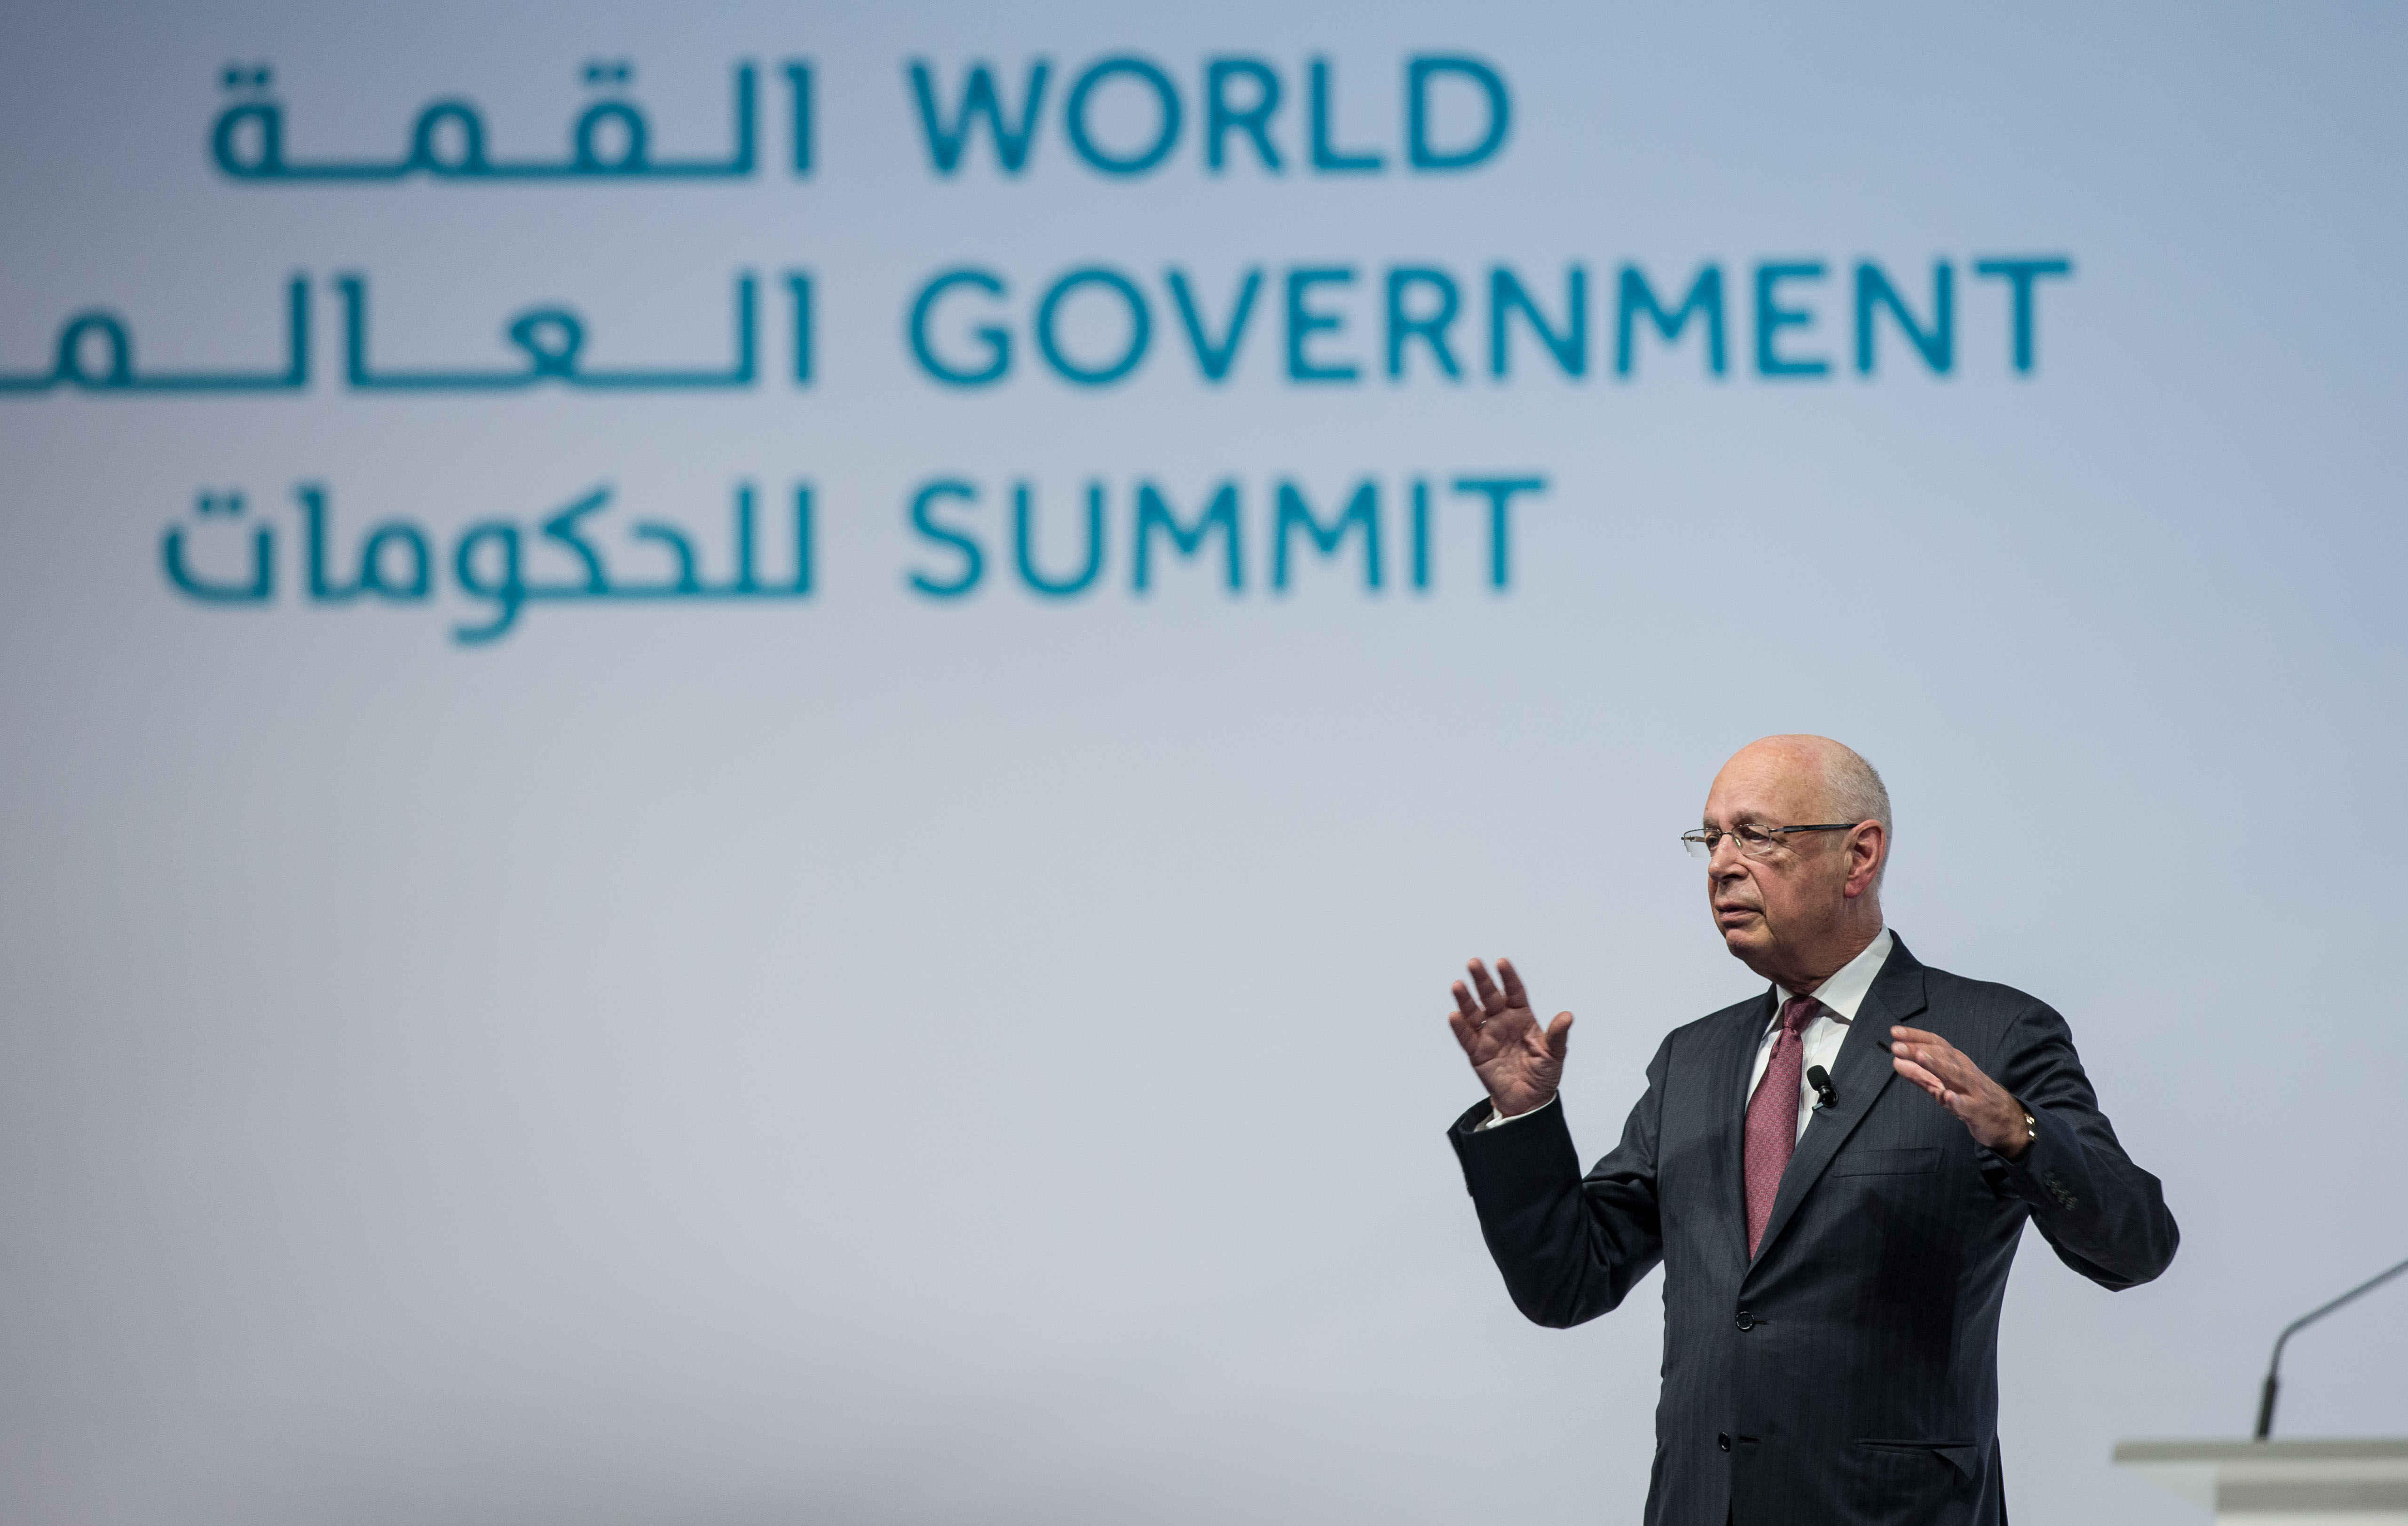 World Government Summit 2017: Governments must work together to meet global challenges